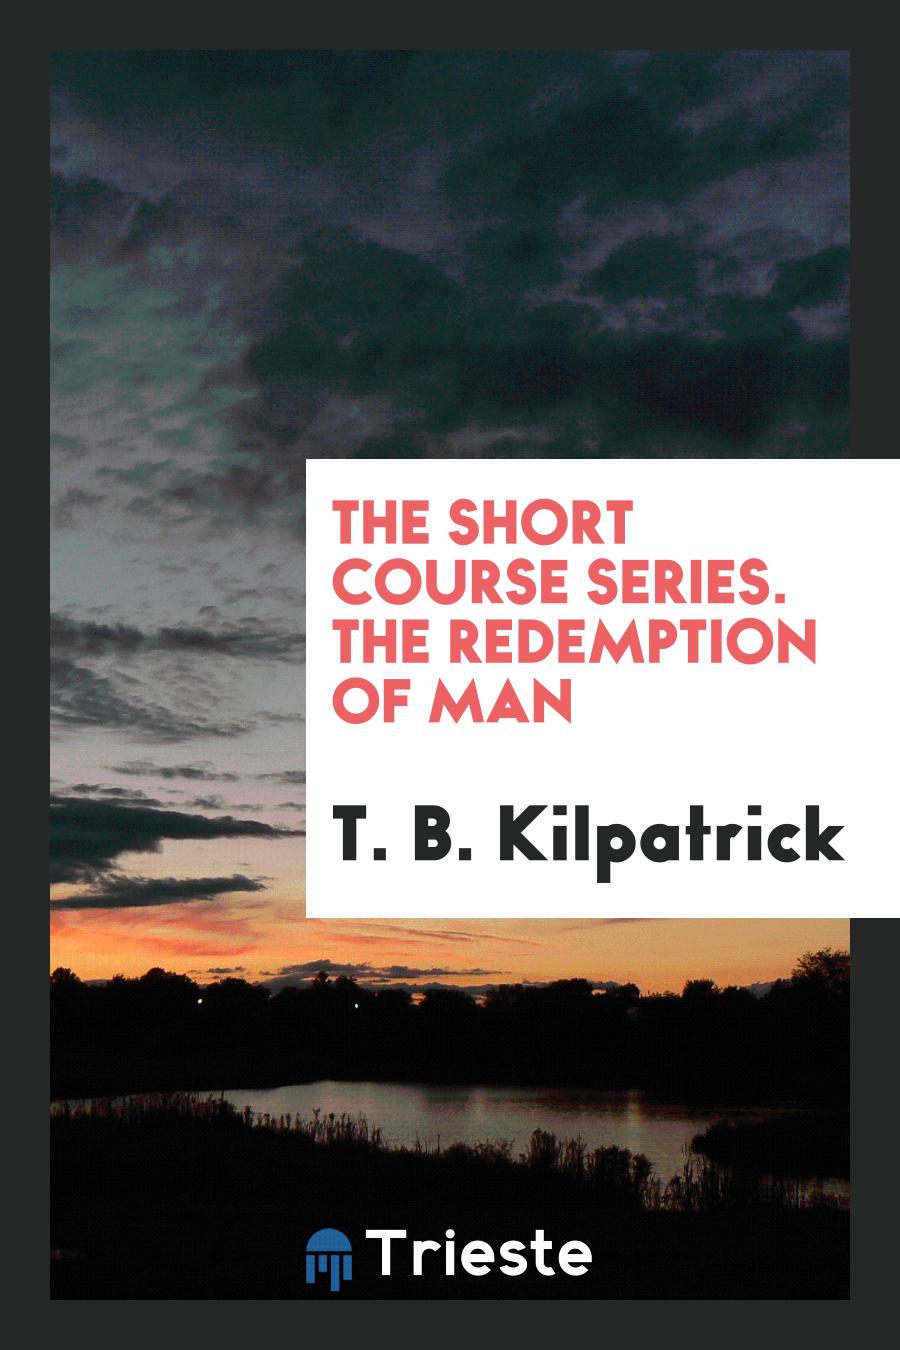 The Short Course Series. The Redemption of Man